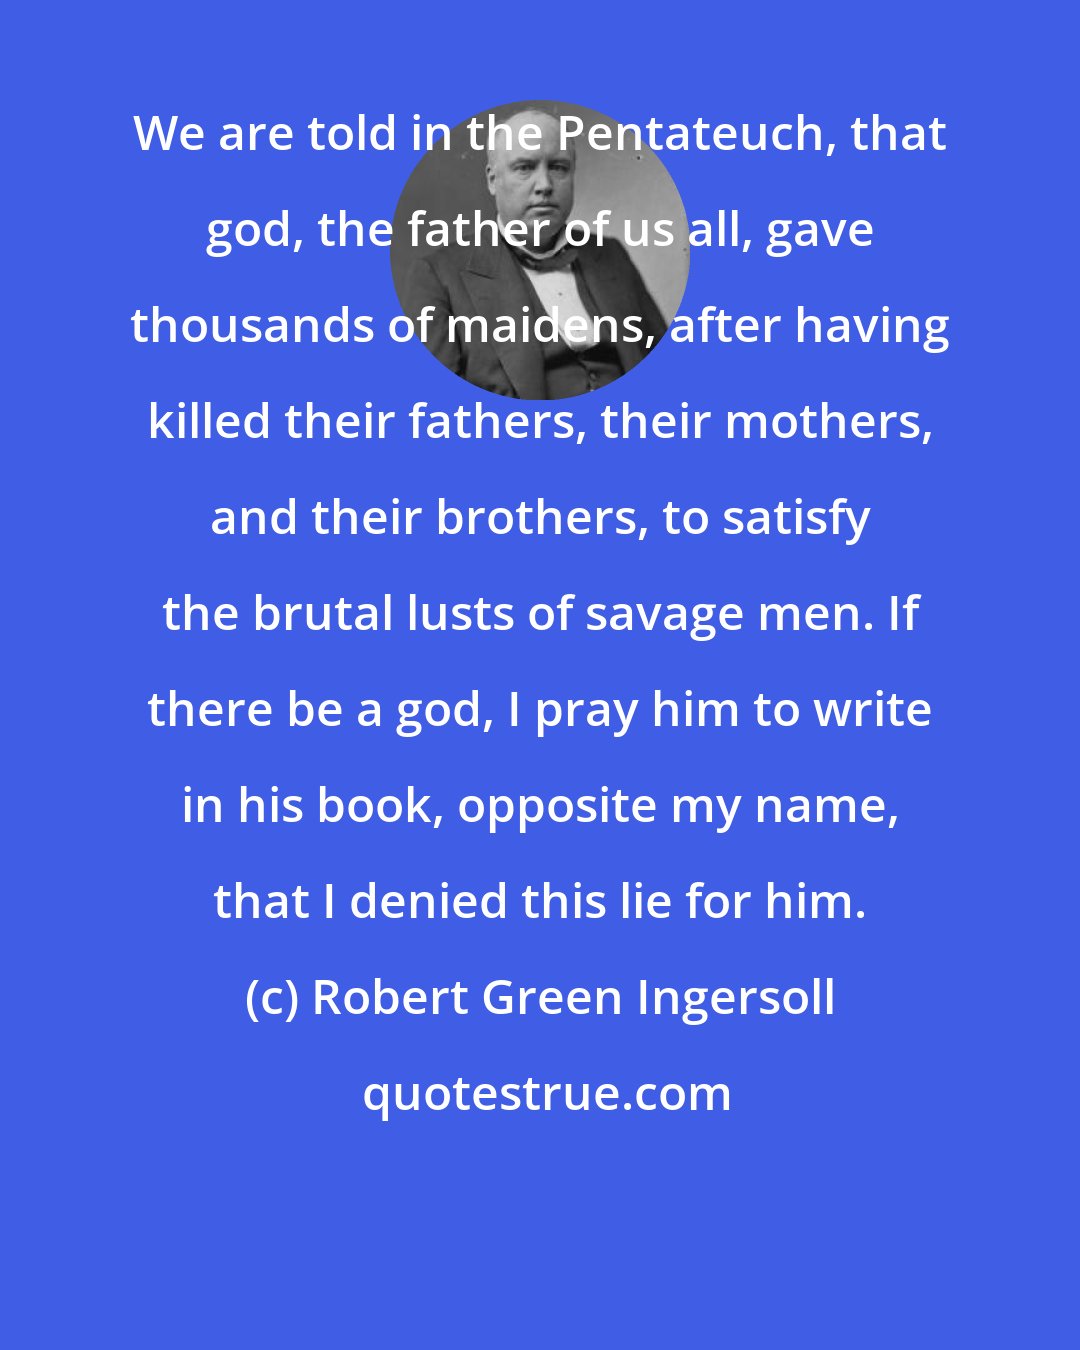 Robert Green Ingersoll: We are told in the Pentateuch, that god, the father of us all, gave thousands of maidens, after having killed their fathers, their mothers, and their brothers, to satisfy the brutal lusts of savage men. If there be a god, I pray him to write in his book, opposite my name, that I denied this lie for him.